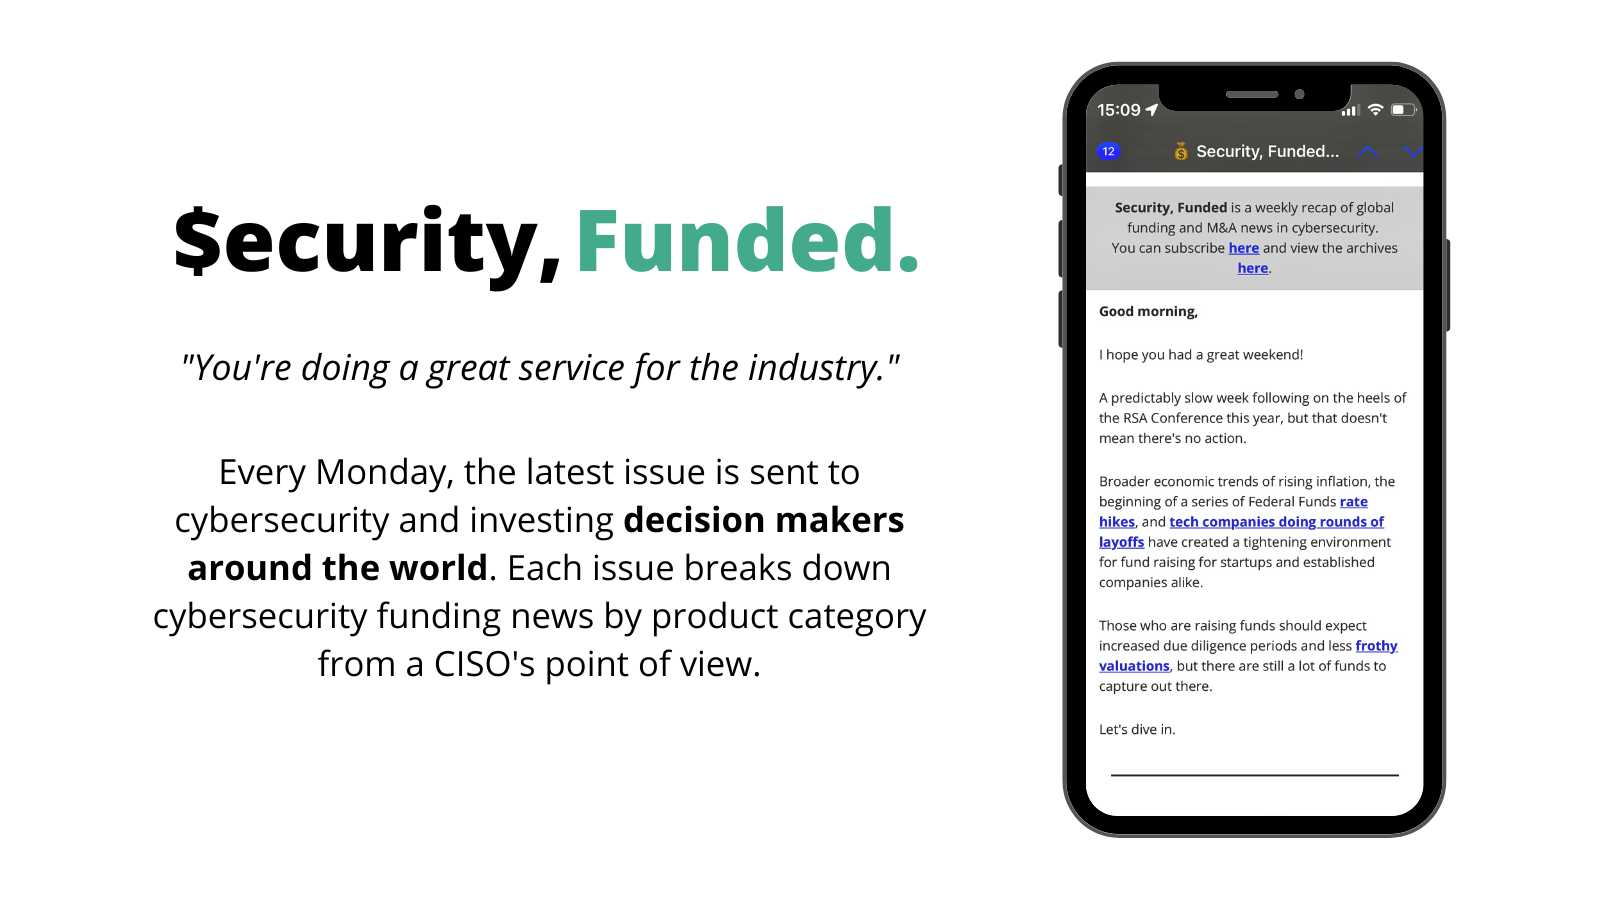 💰Security, Funded #58 - More deals going private, a really low week in funding, and getting creative